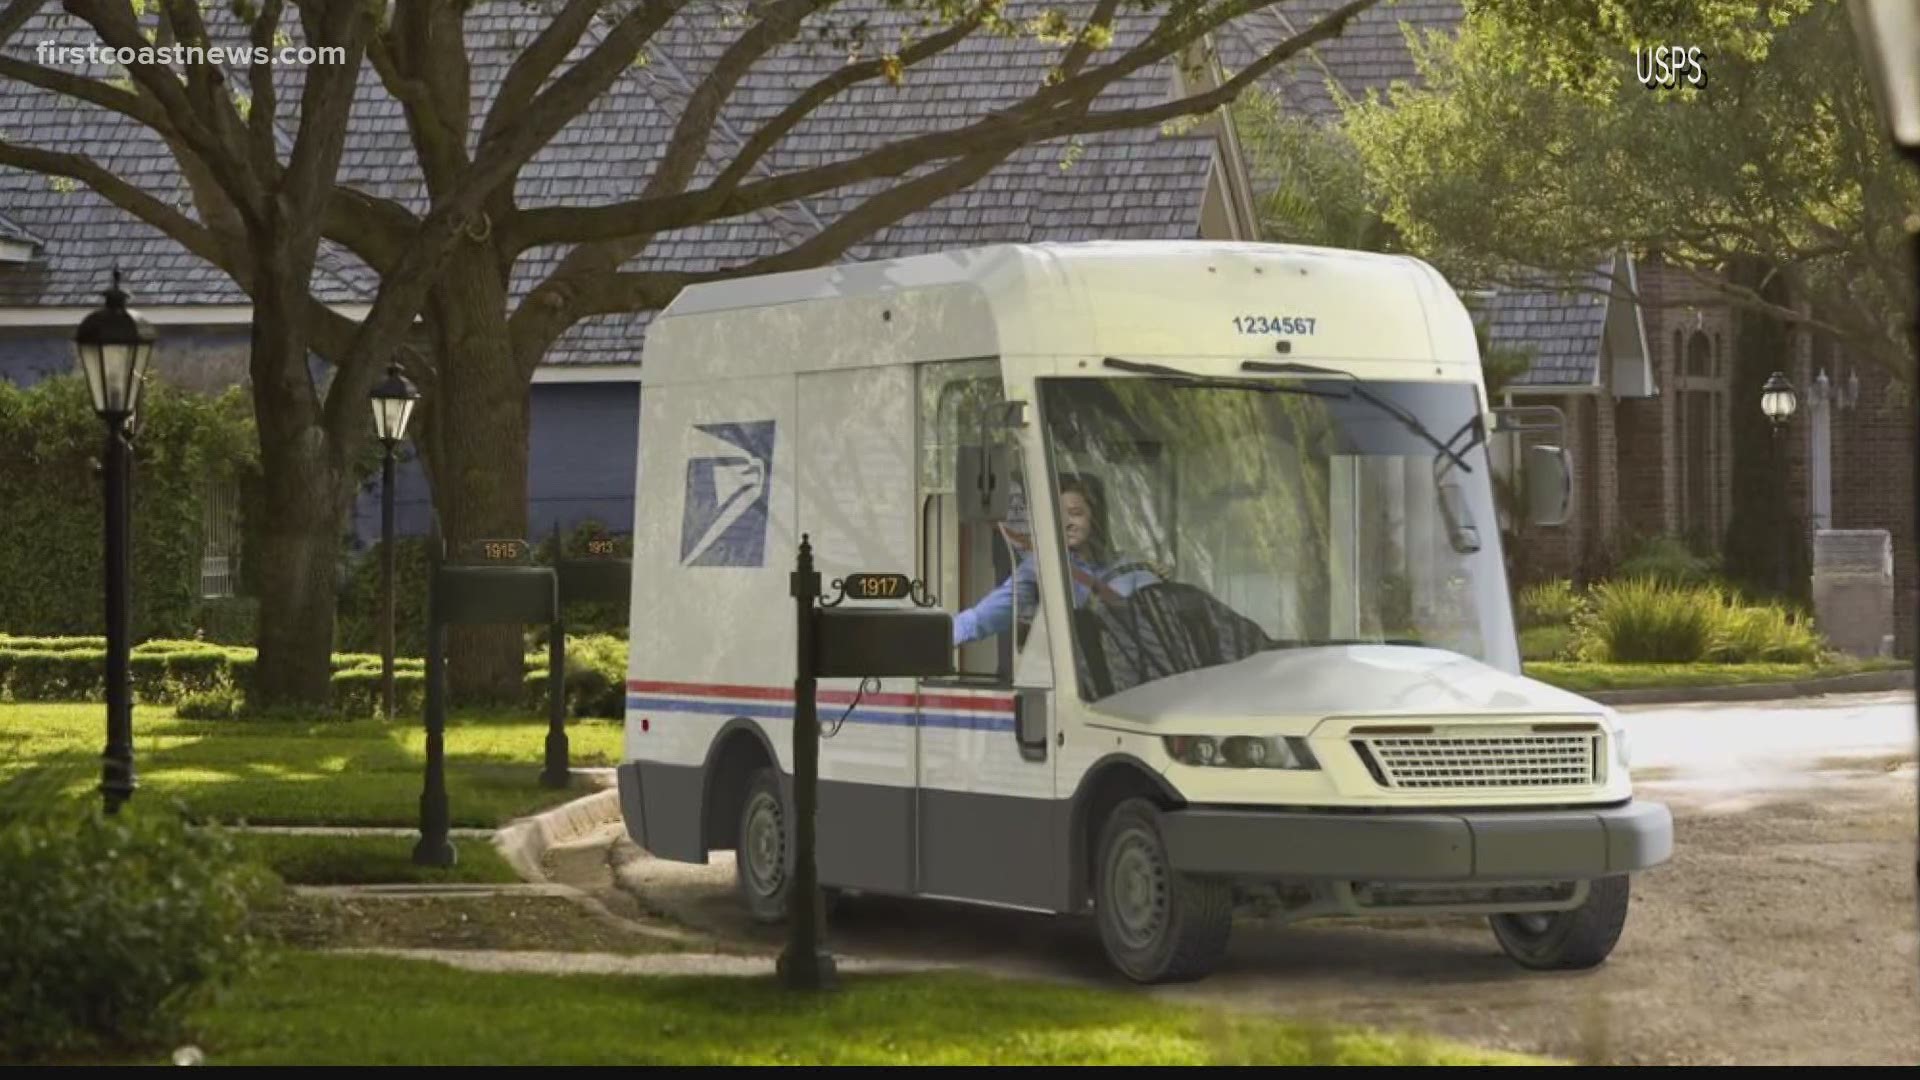 These vehicles are high-tech, according to USPS.